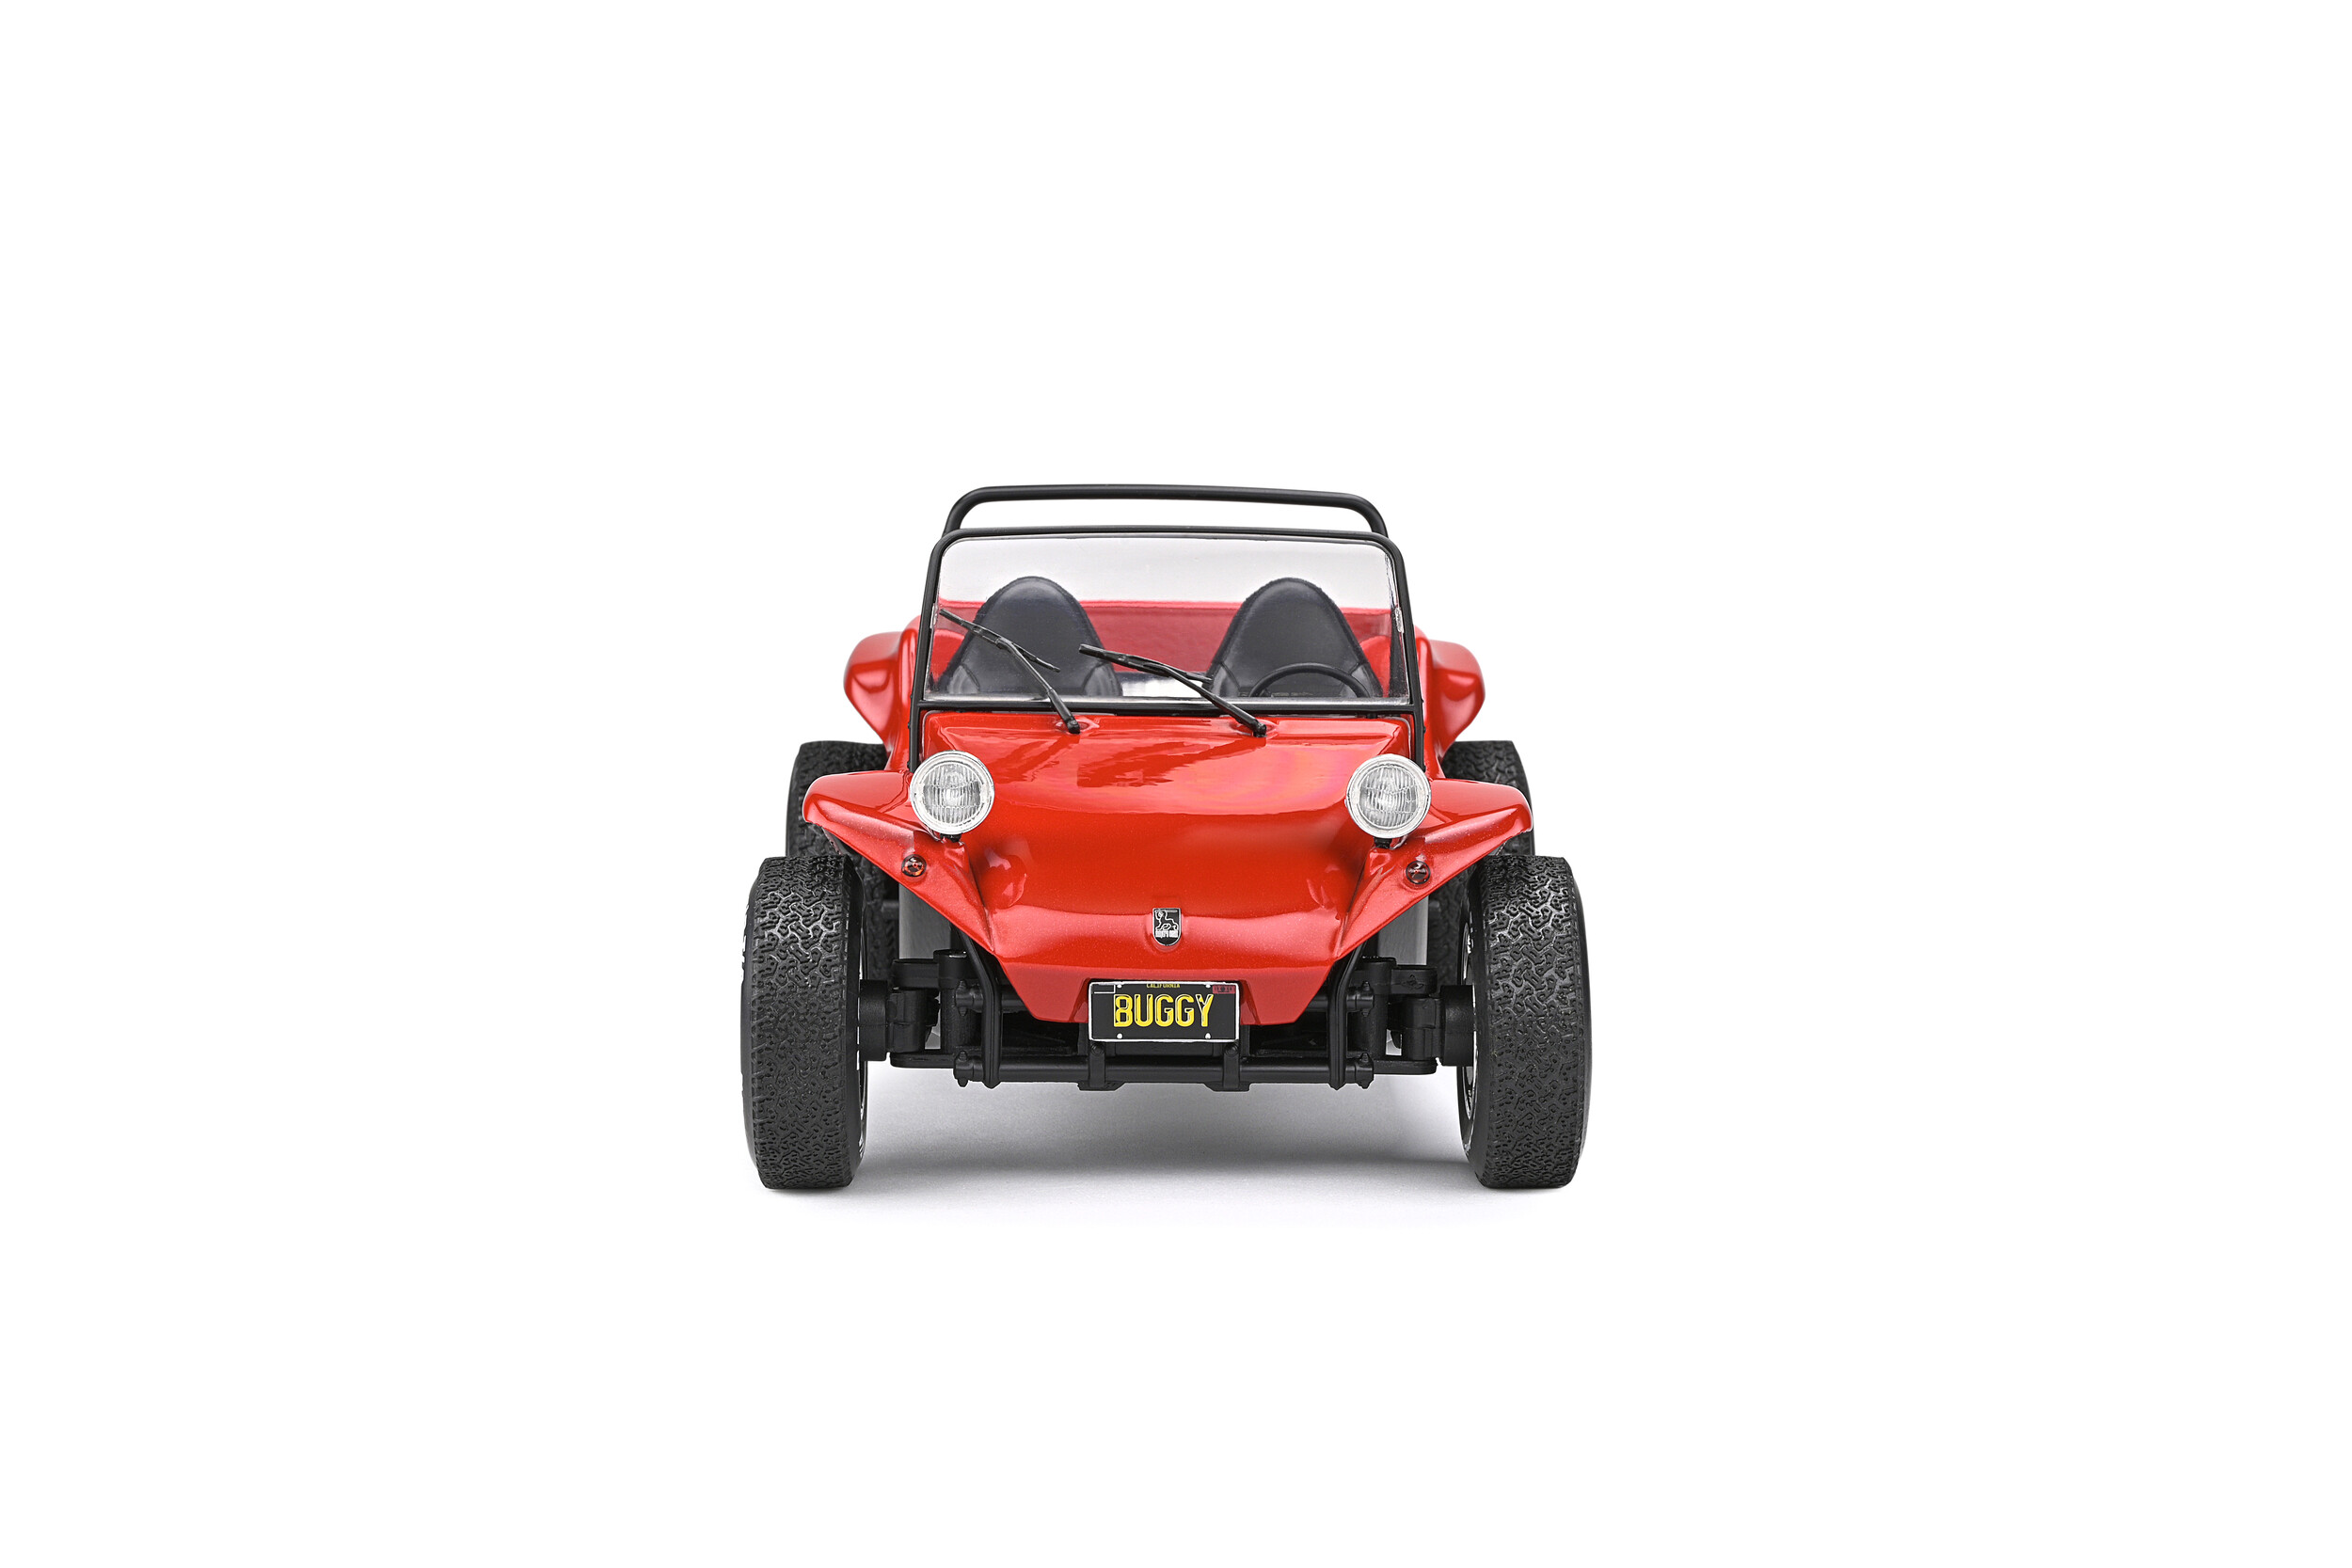 Bos-models 87045 1/87 H0 Meyers Manx Buggy Der Sandd-Style Auto Miniatur Rot Ho